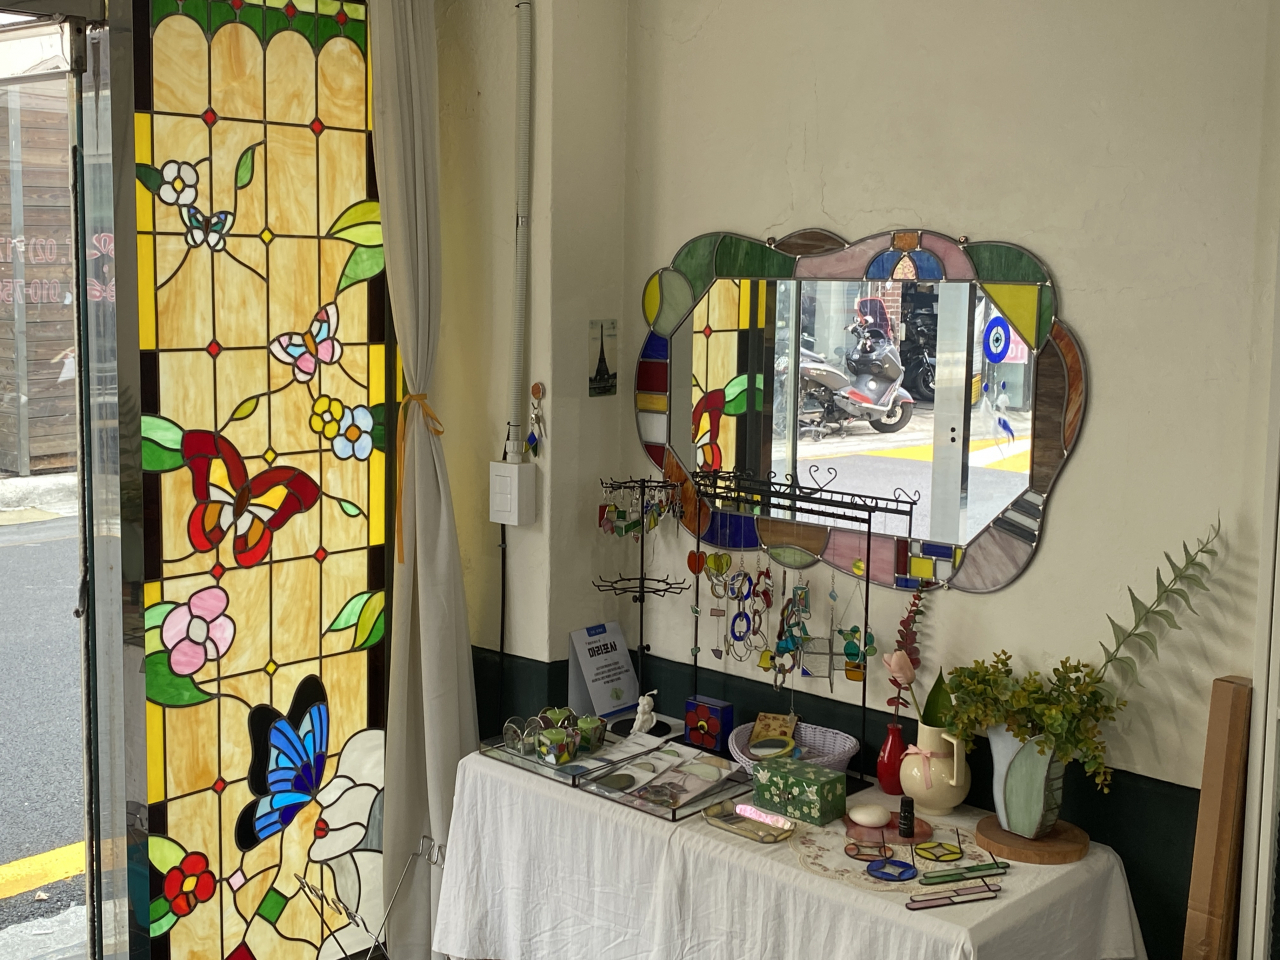 Stained glass windows and decorations are on display at Mariposa Stained Glass. (Hwang Joo-young/The Korea Herald)